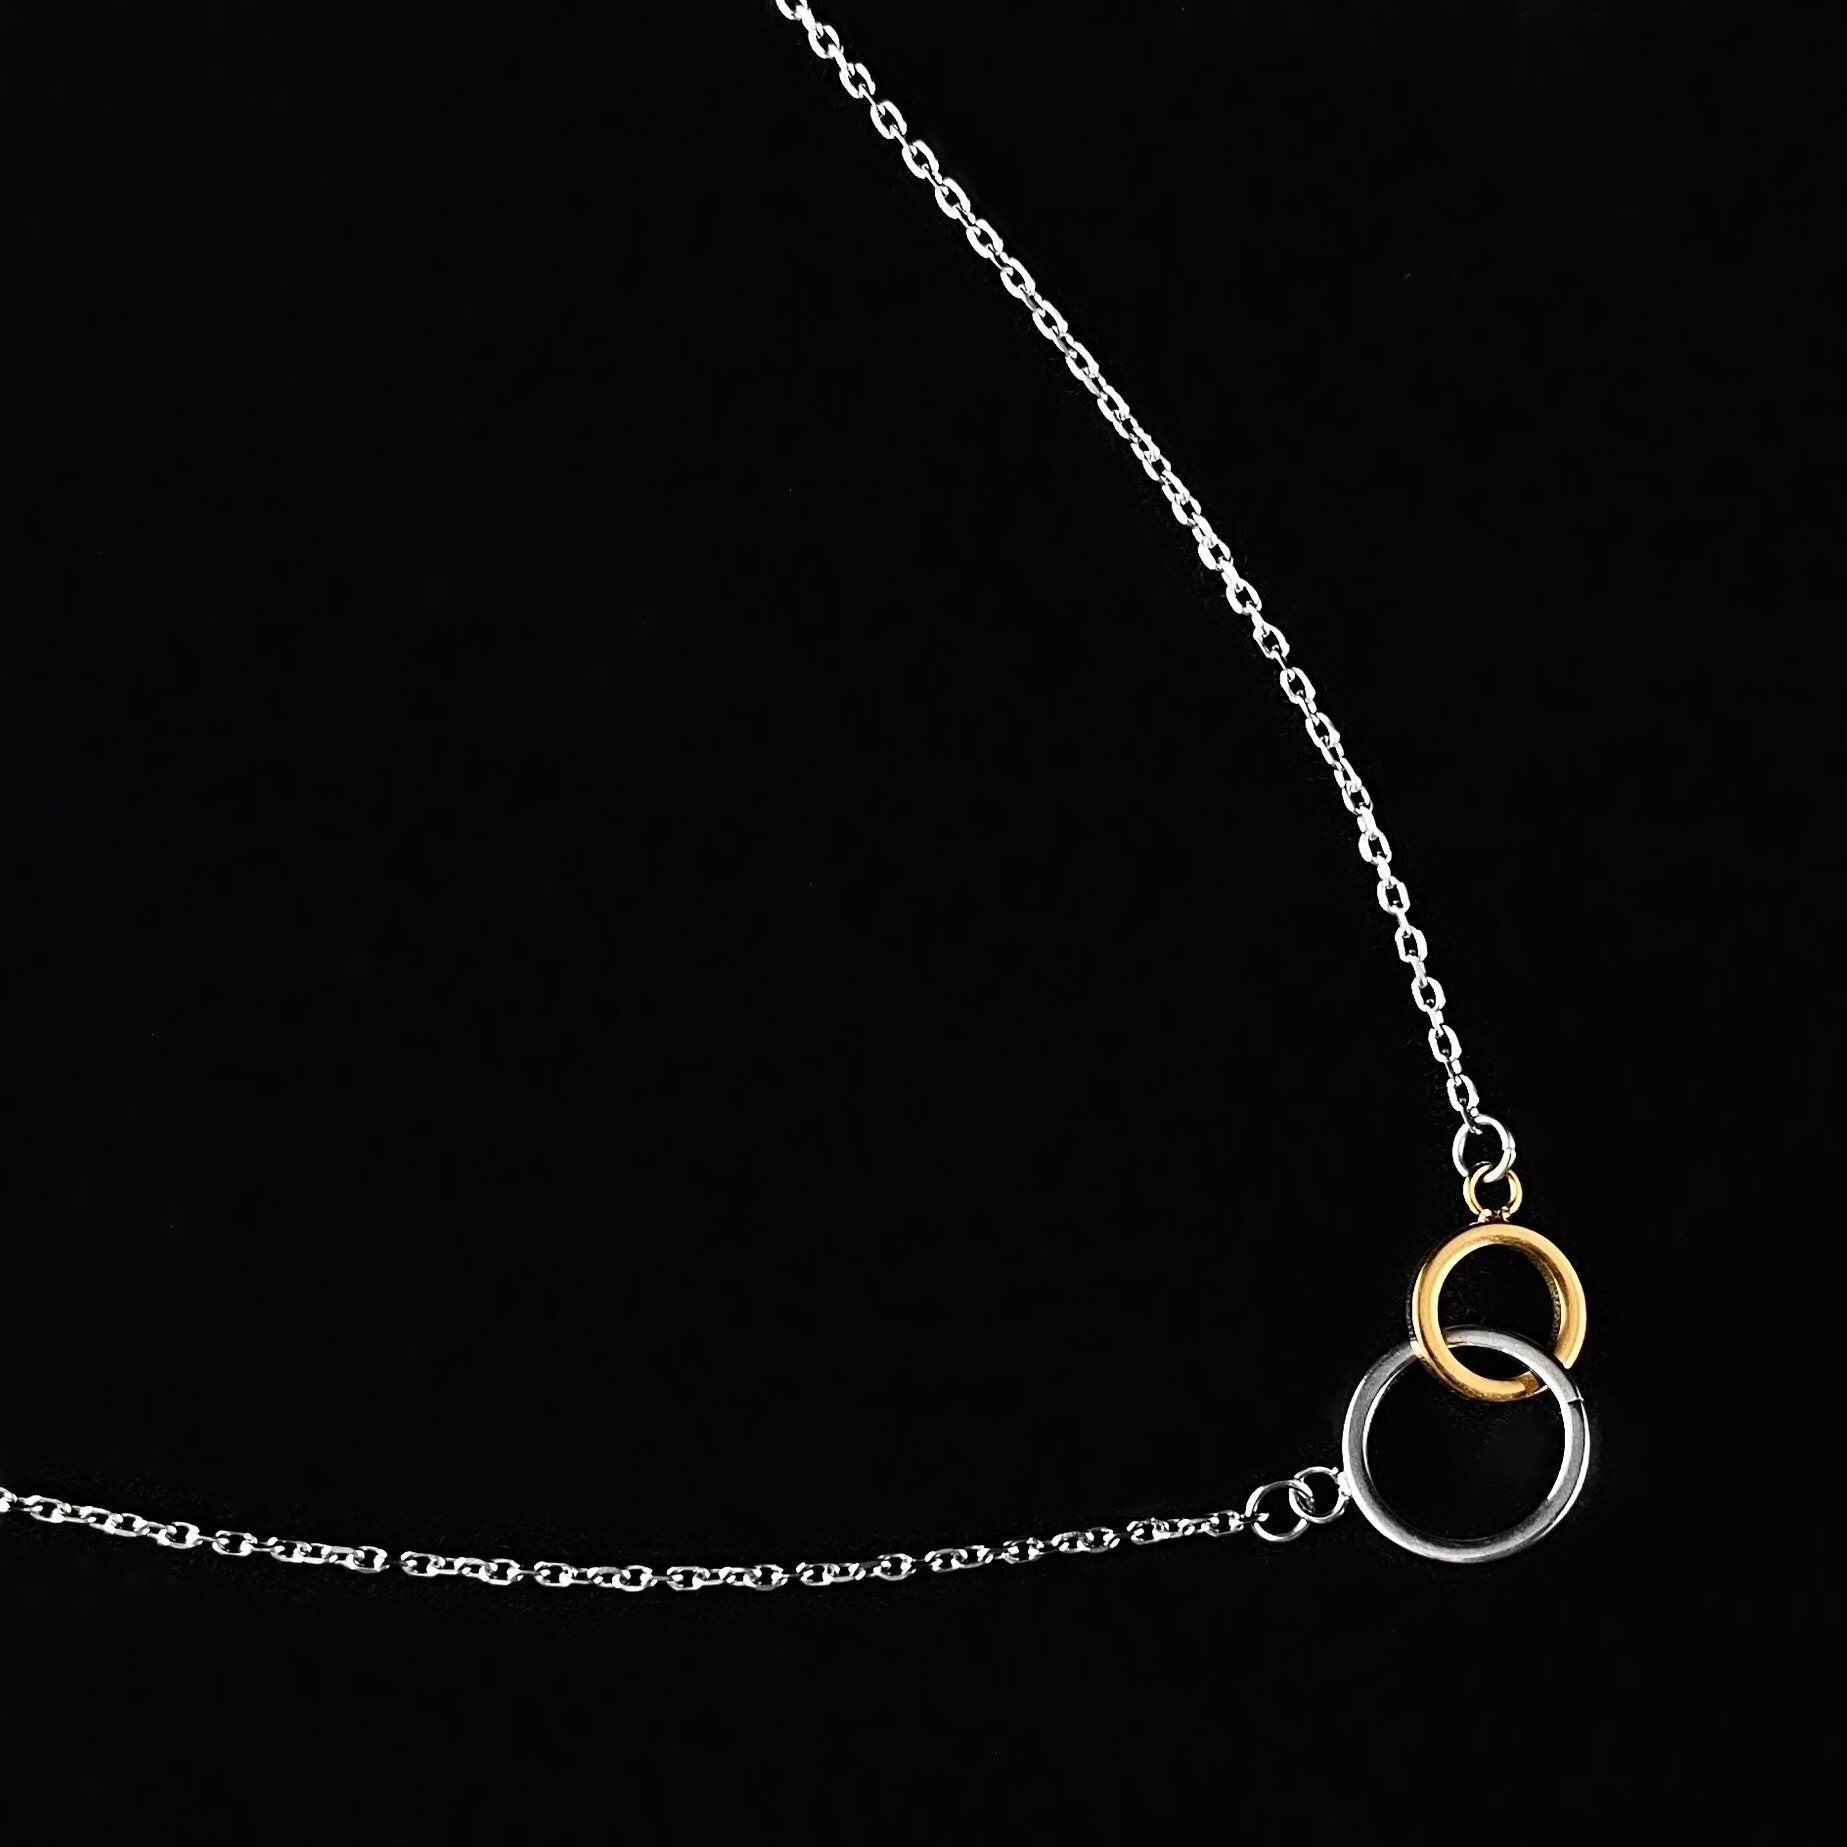 Dainty Silver and Gold Double Circle Pendant Necklace - Sabrina